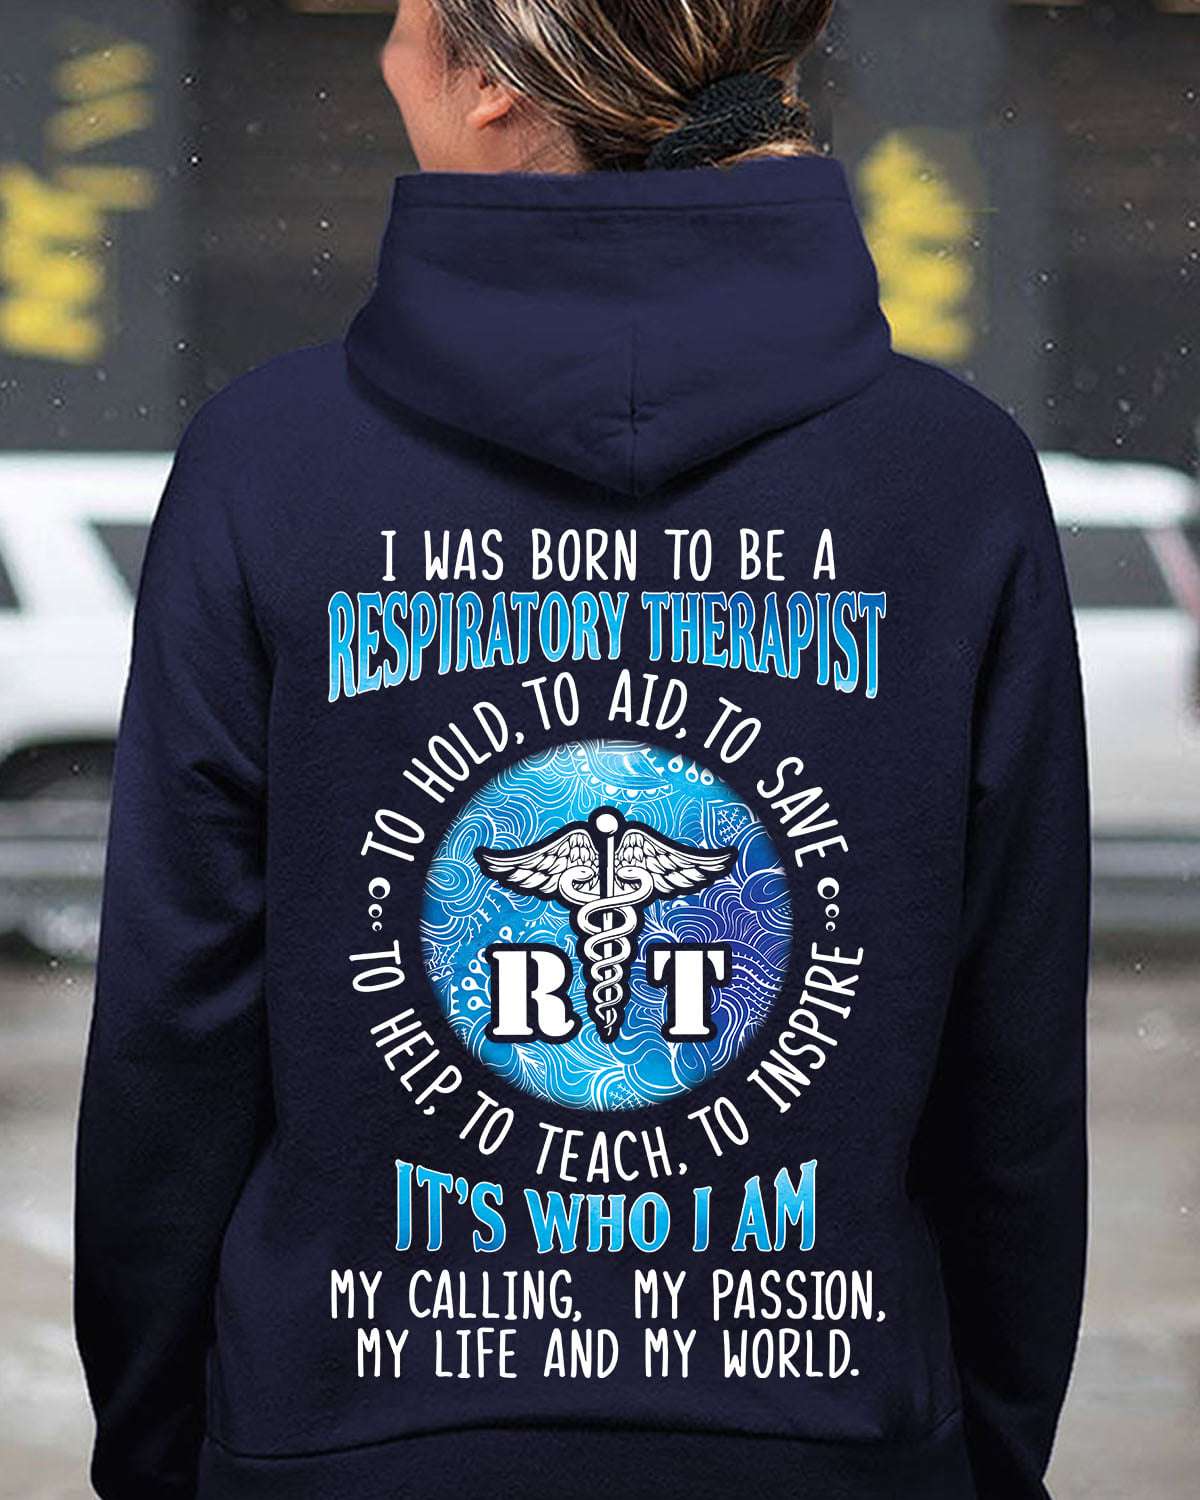 I was born to be a Respiratory therapist - To help, to teach, to inspire